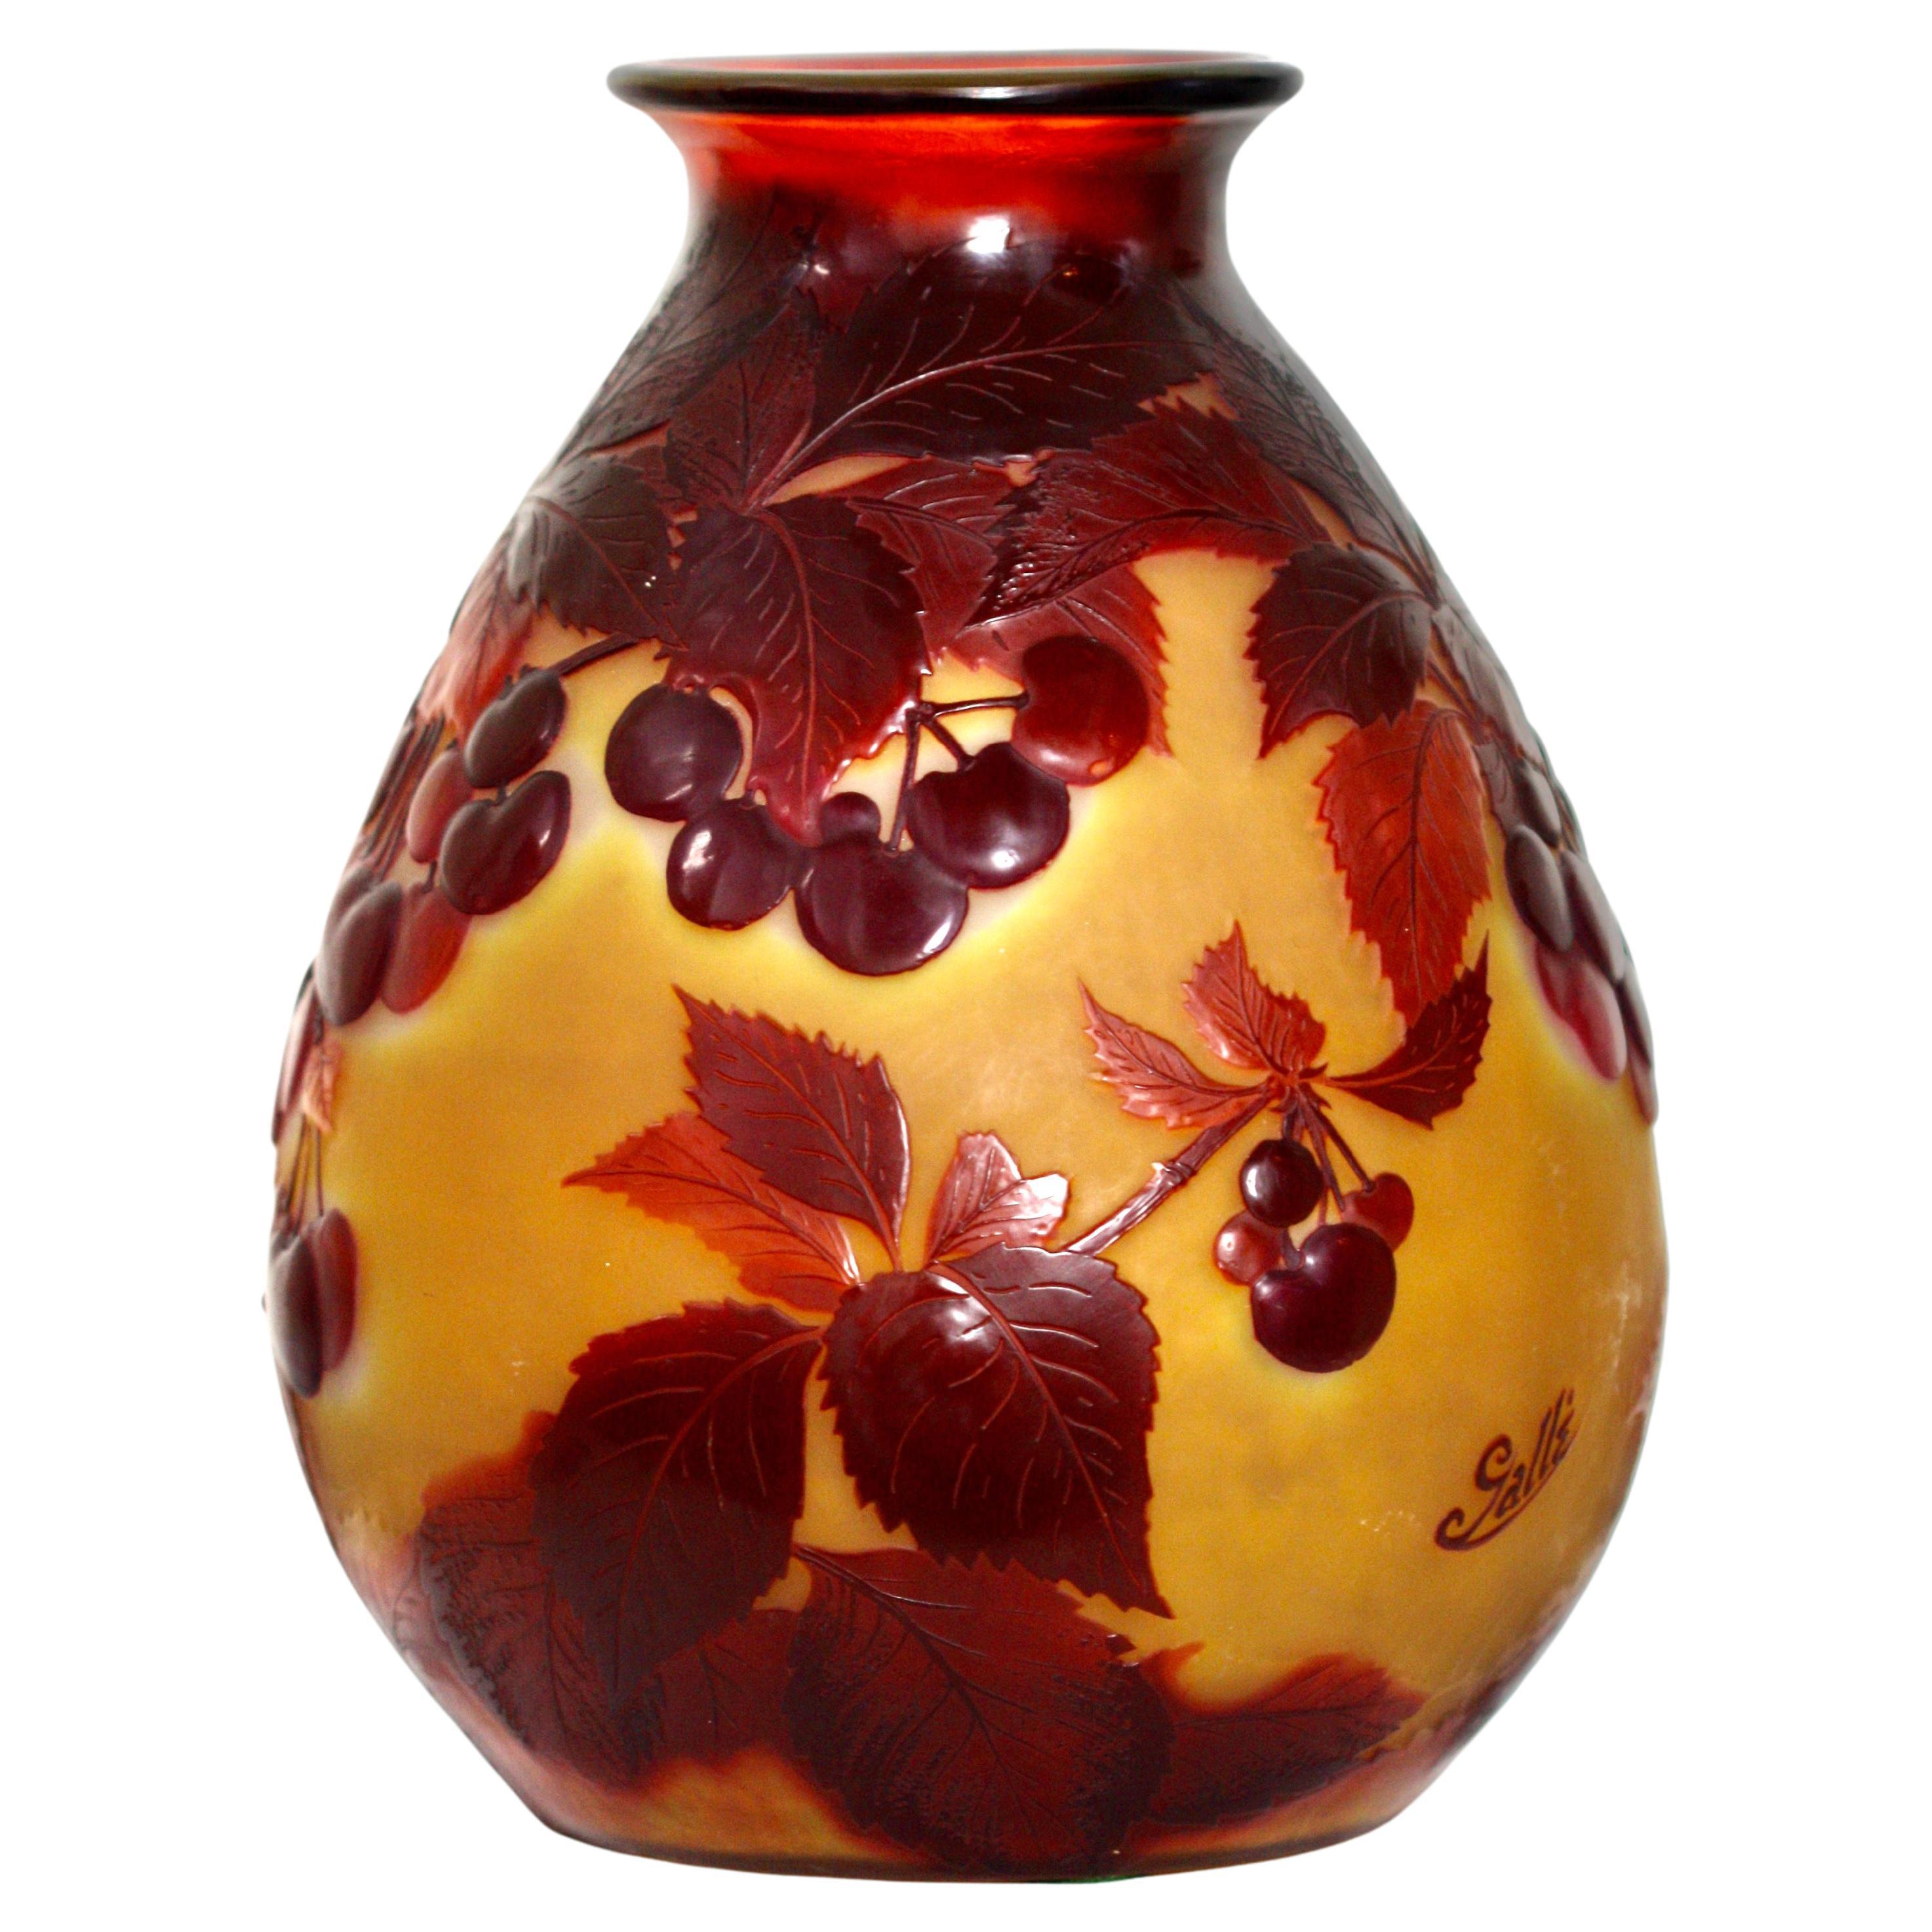 A Very Rare Large And Early Galle Vase, 1890-94 For Sale at 1stDibs